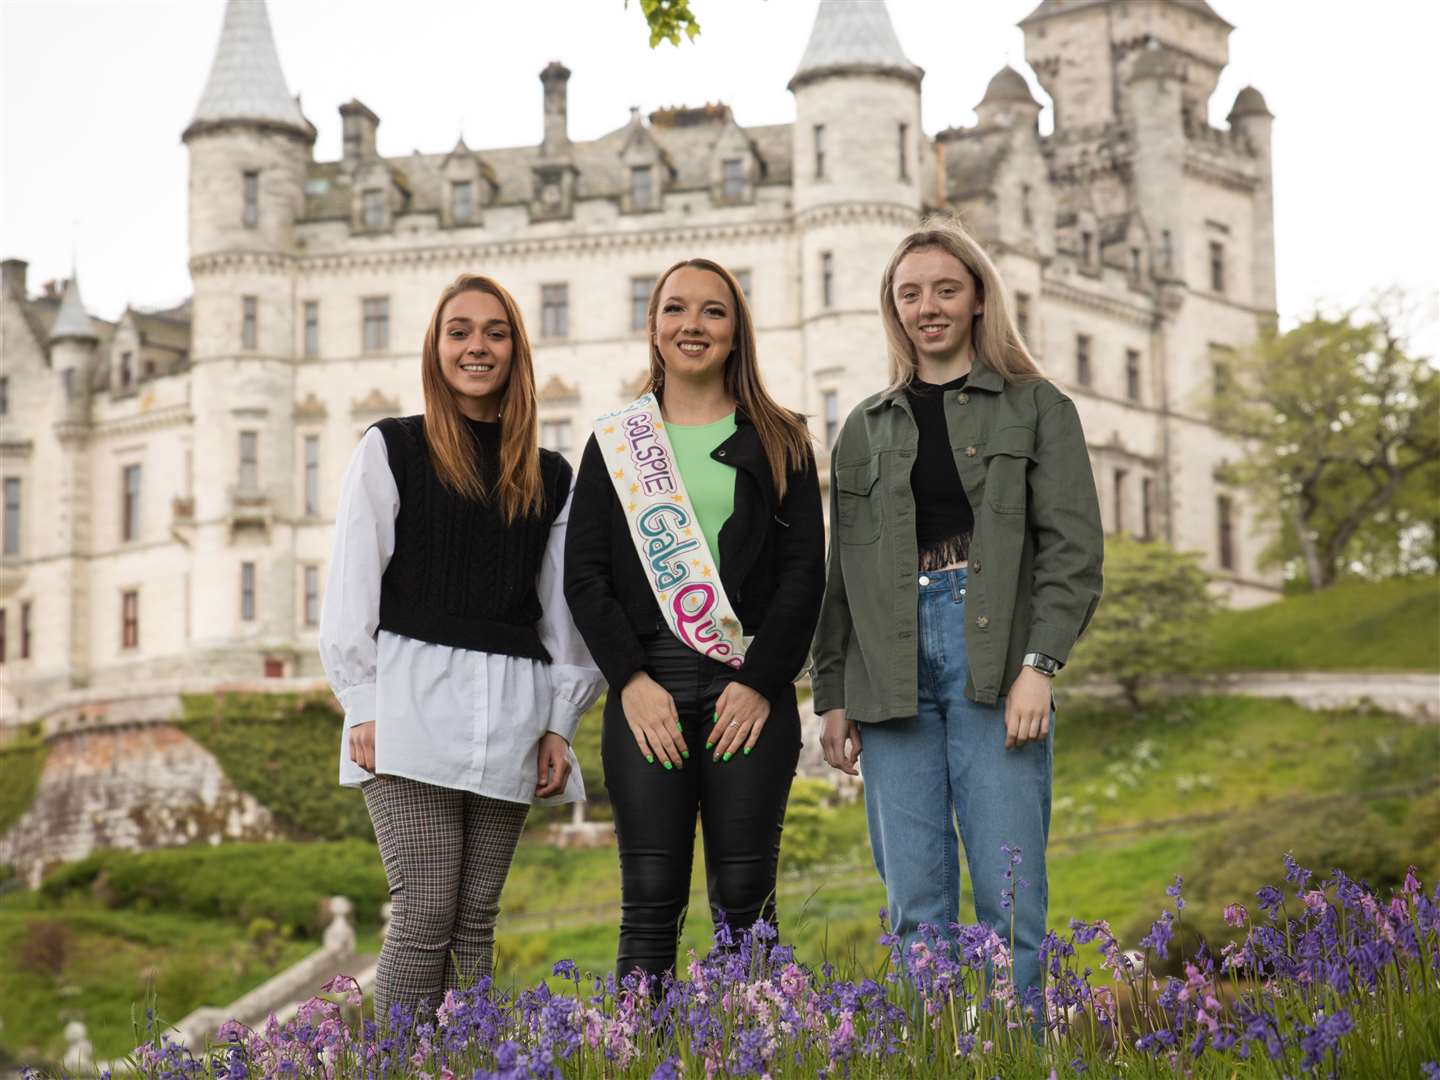 Golspie Gala Week's 2023 Queen Mea Macleod and her attendants Chelsea Morrison and Tyler Oglesby. Picture: Kirsty McNamara